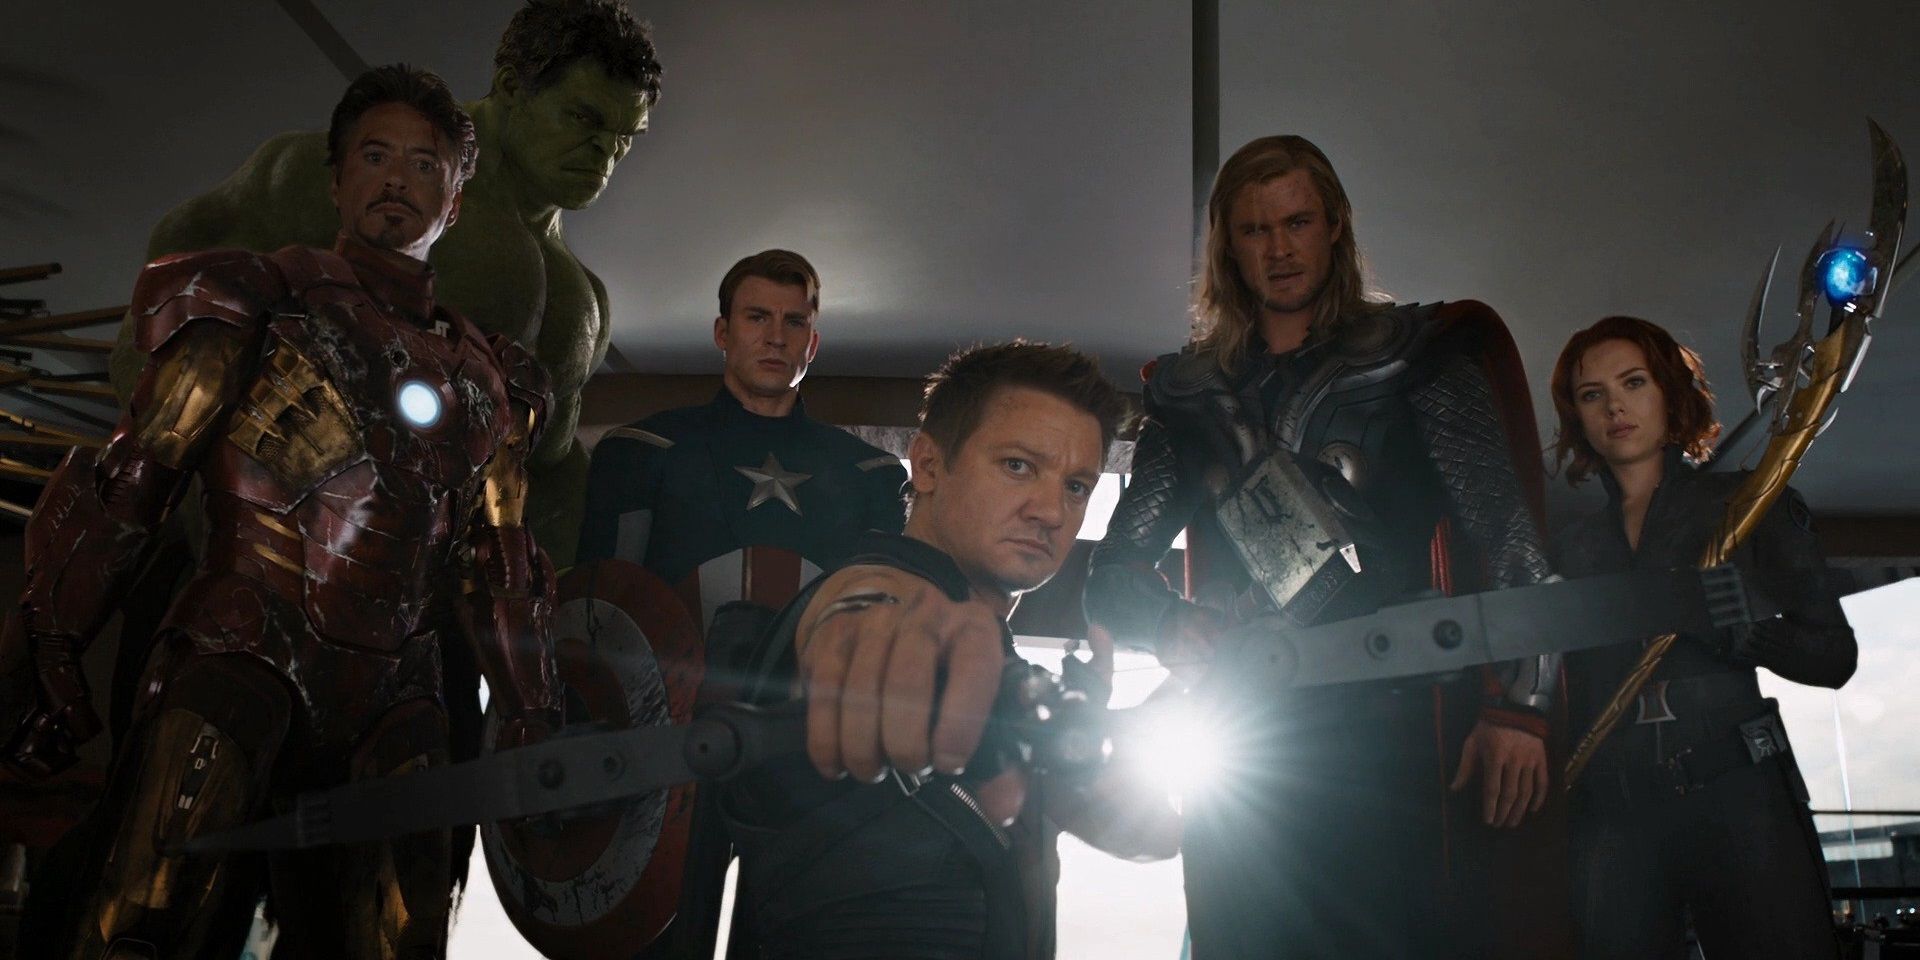 The Avengers group shot at the end of the first movie